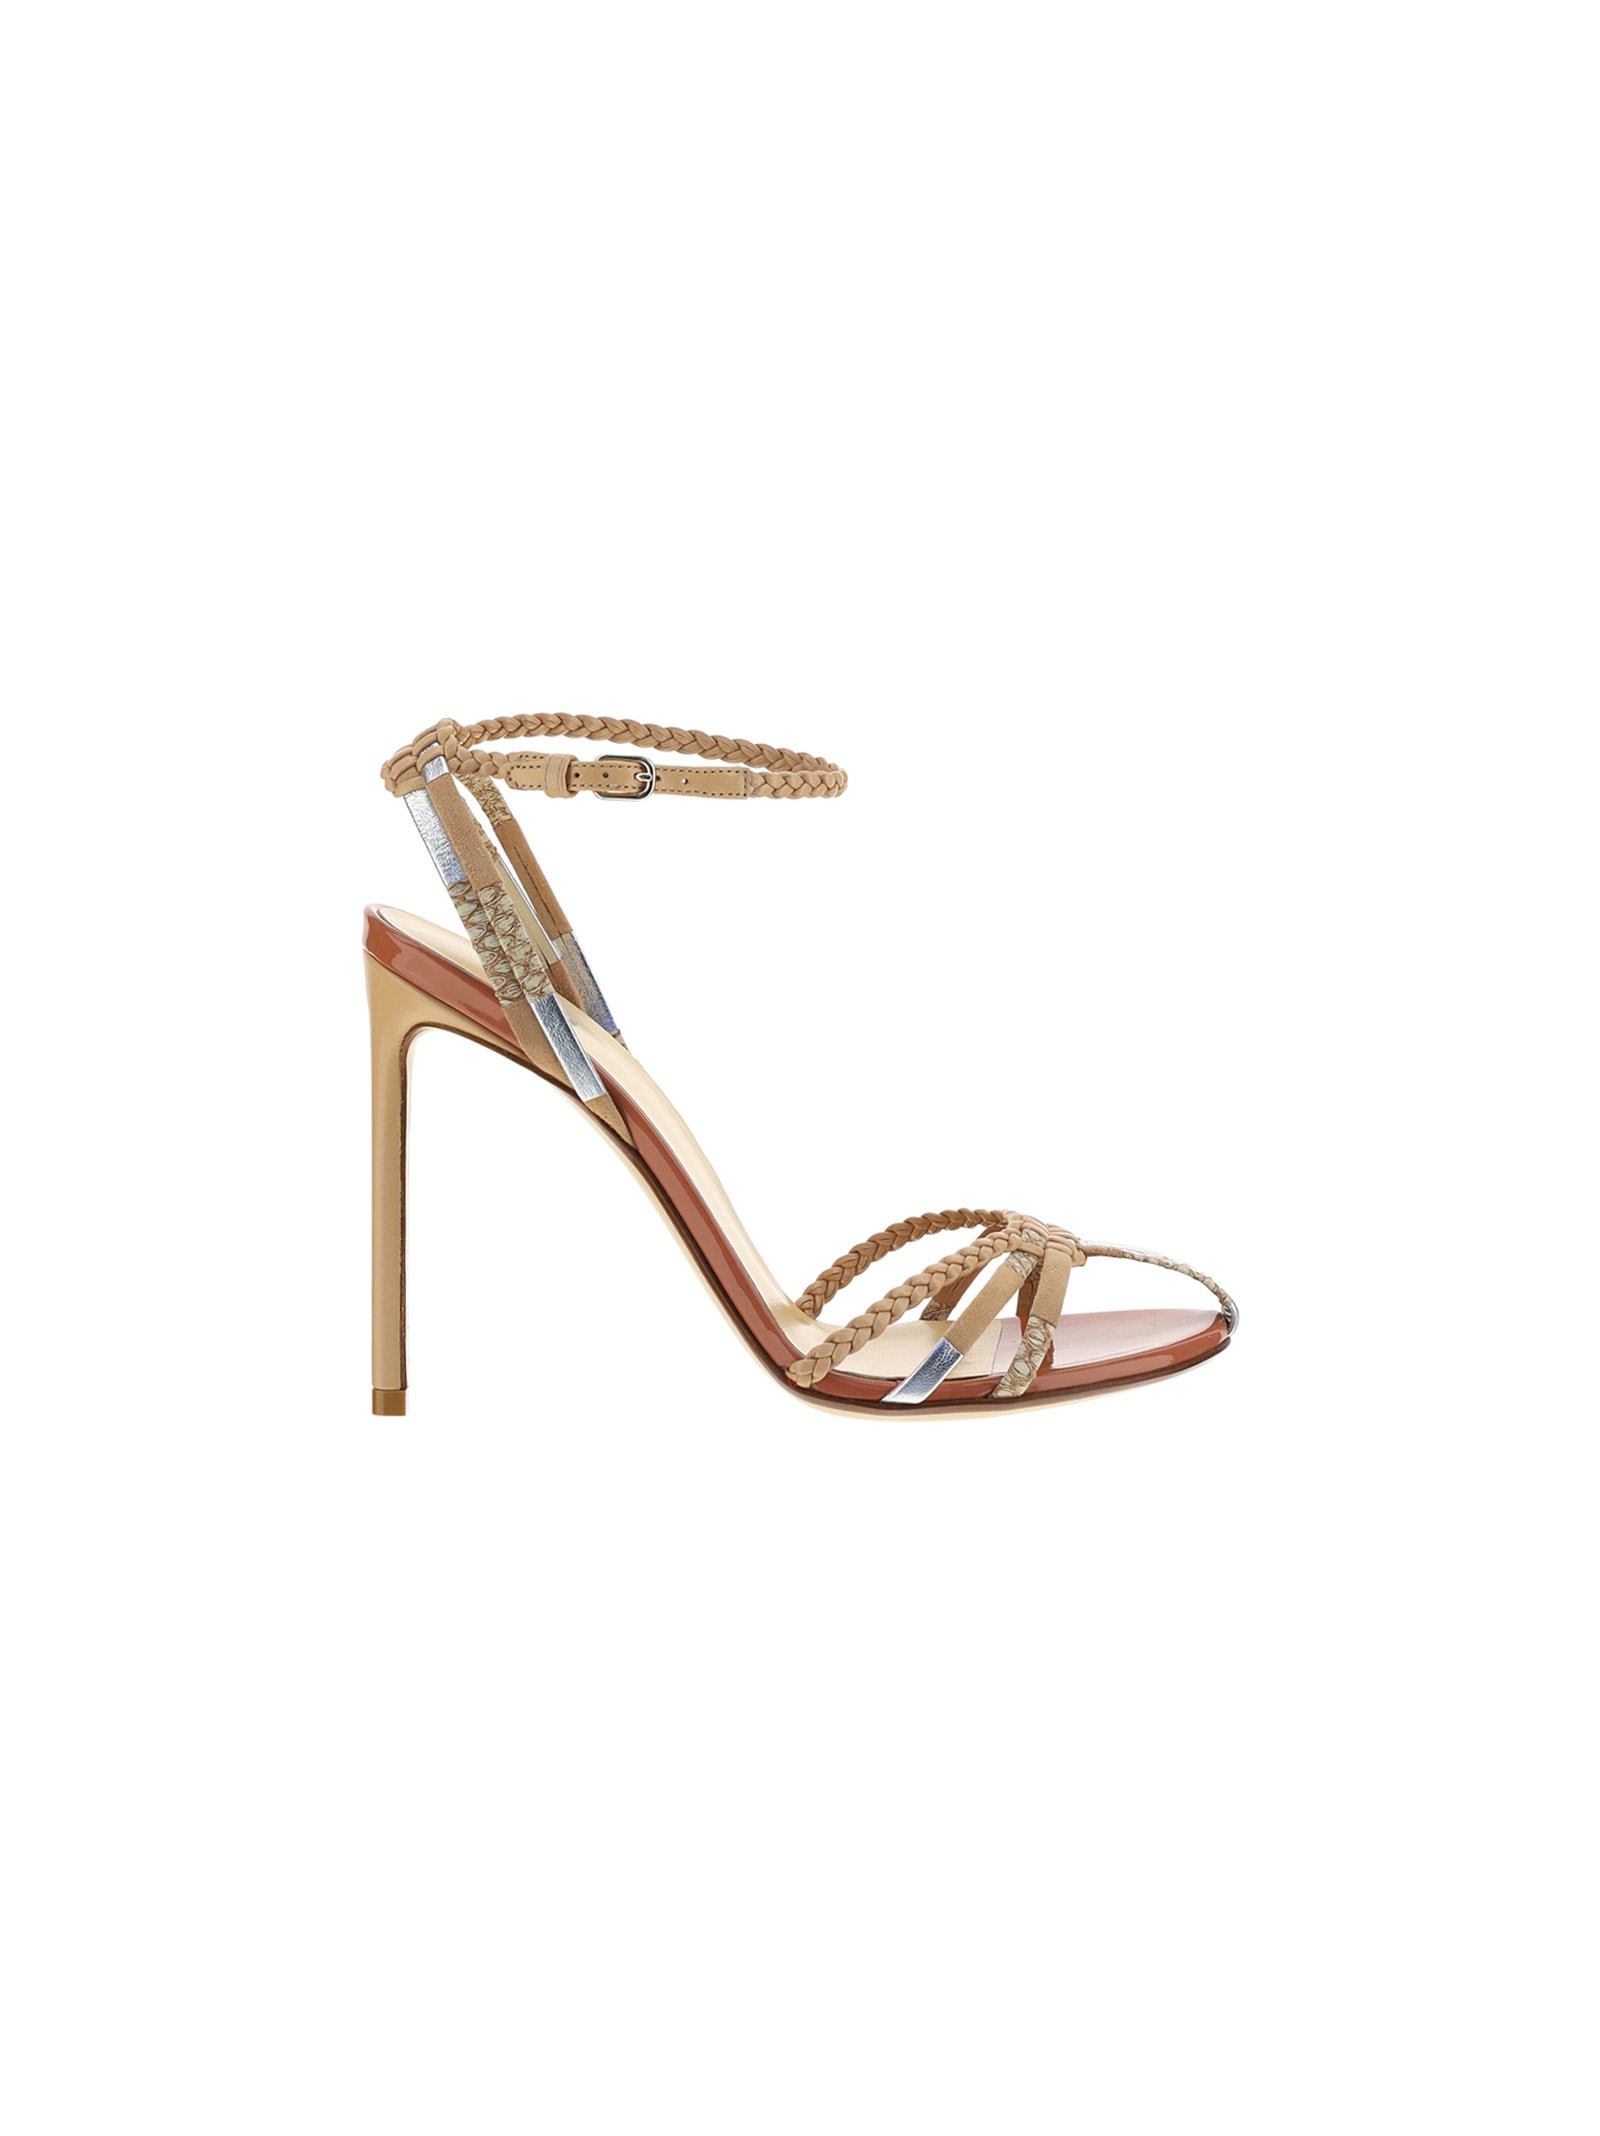 Buy Francesco Russo Sandals online, shop Francesco Russo shoes with free shipping